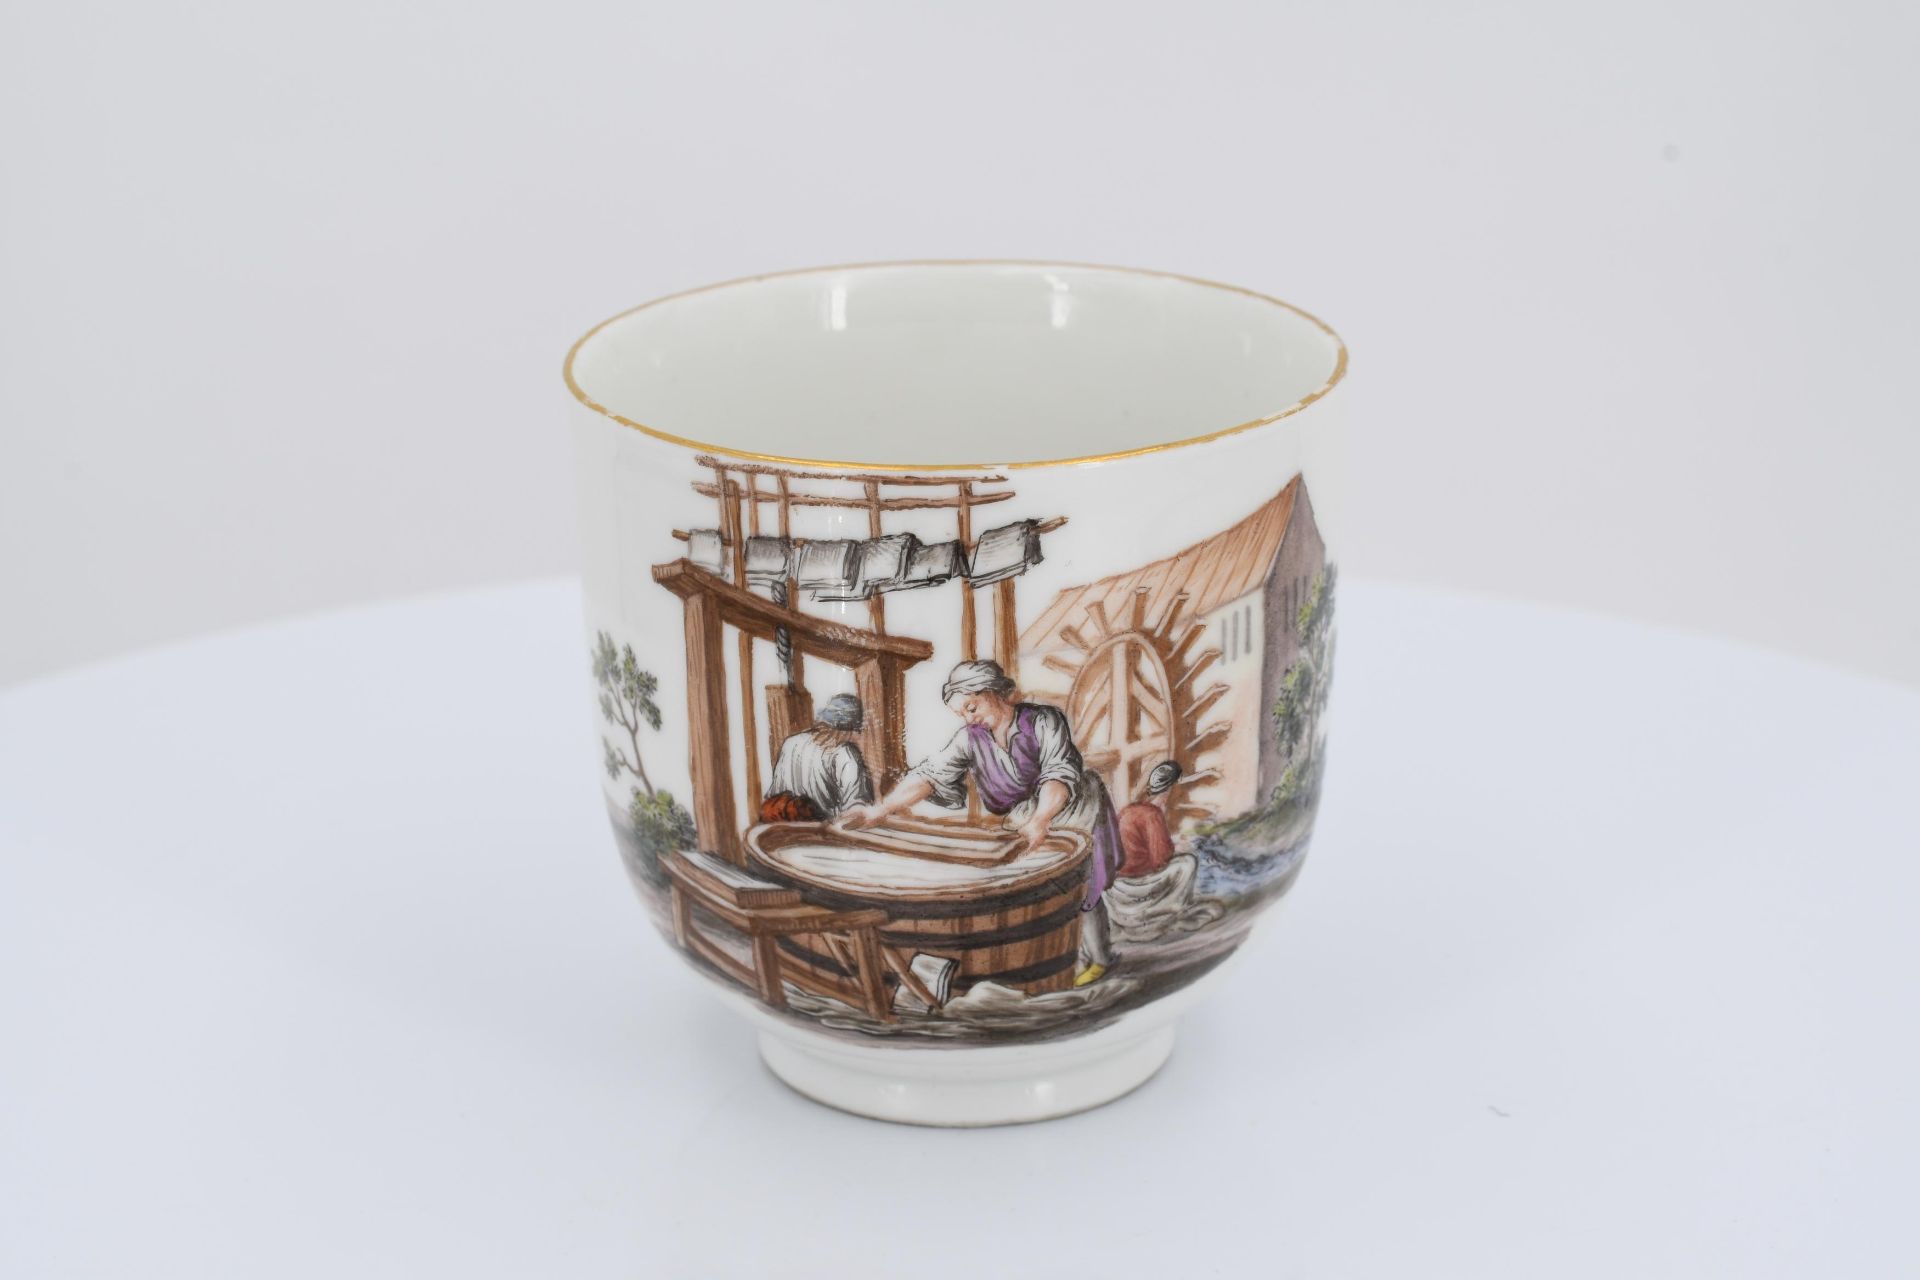 Porcelain cup and saucer with occupation depictions - Image 7 of 9